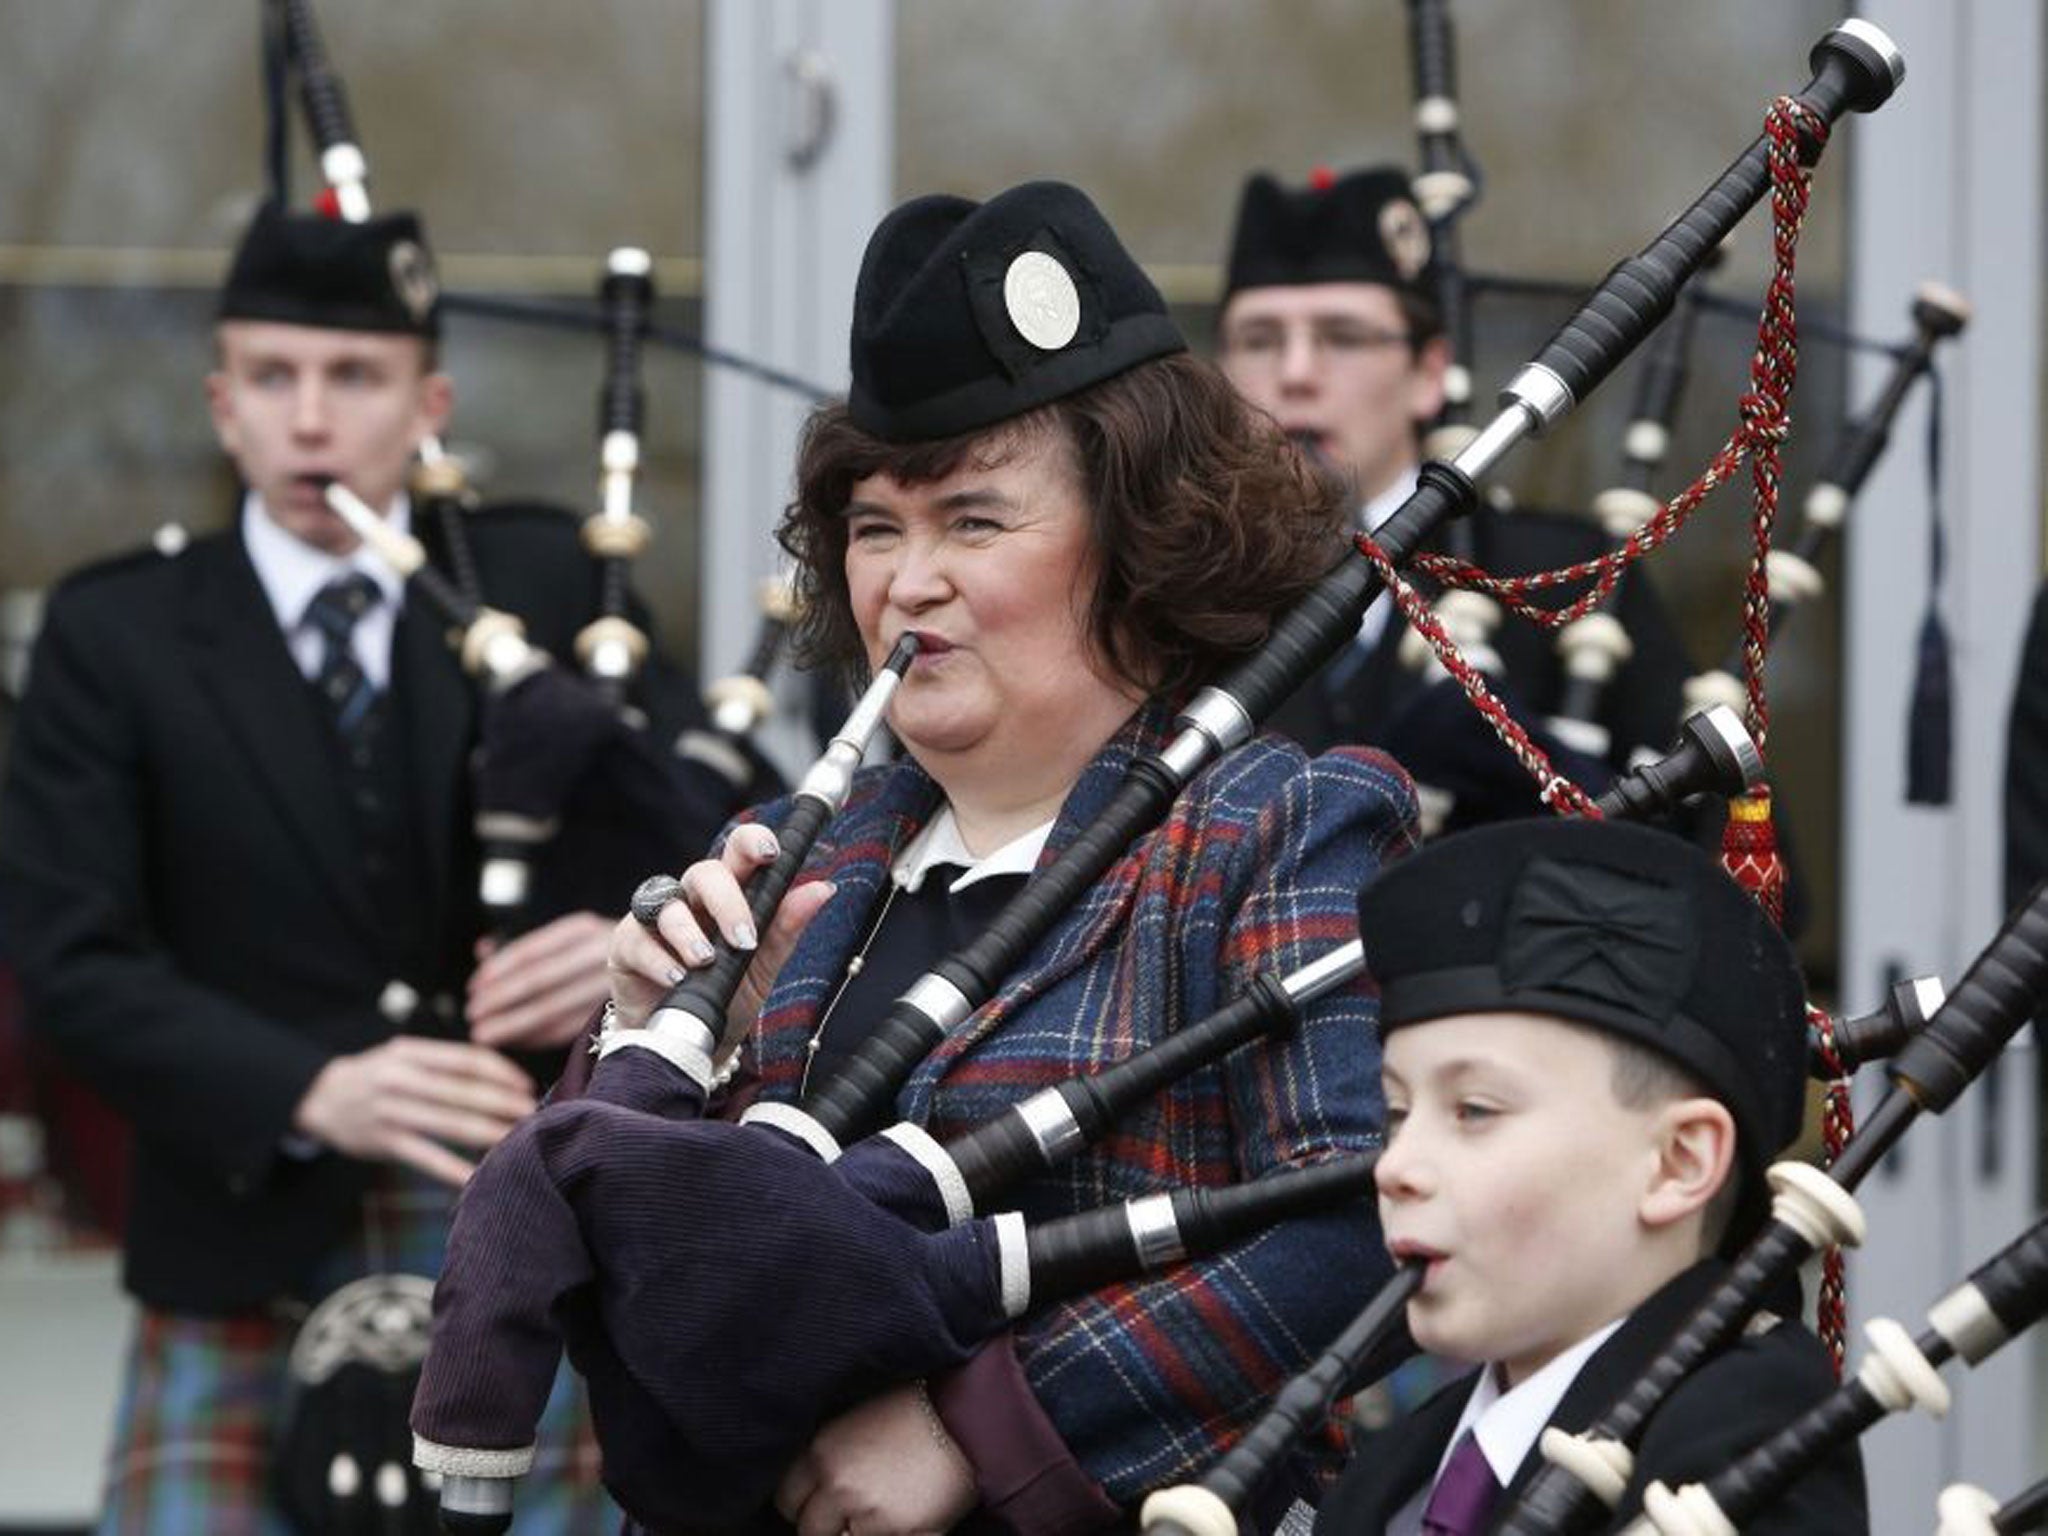 Scottish singer Susan Boyle will perform at the Commonwealth Games opening ceremony in Glasgow